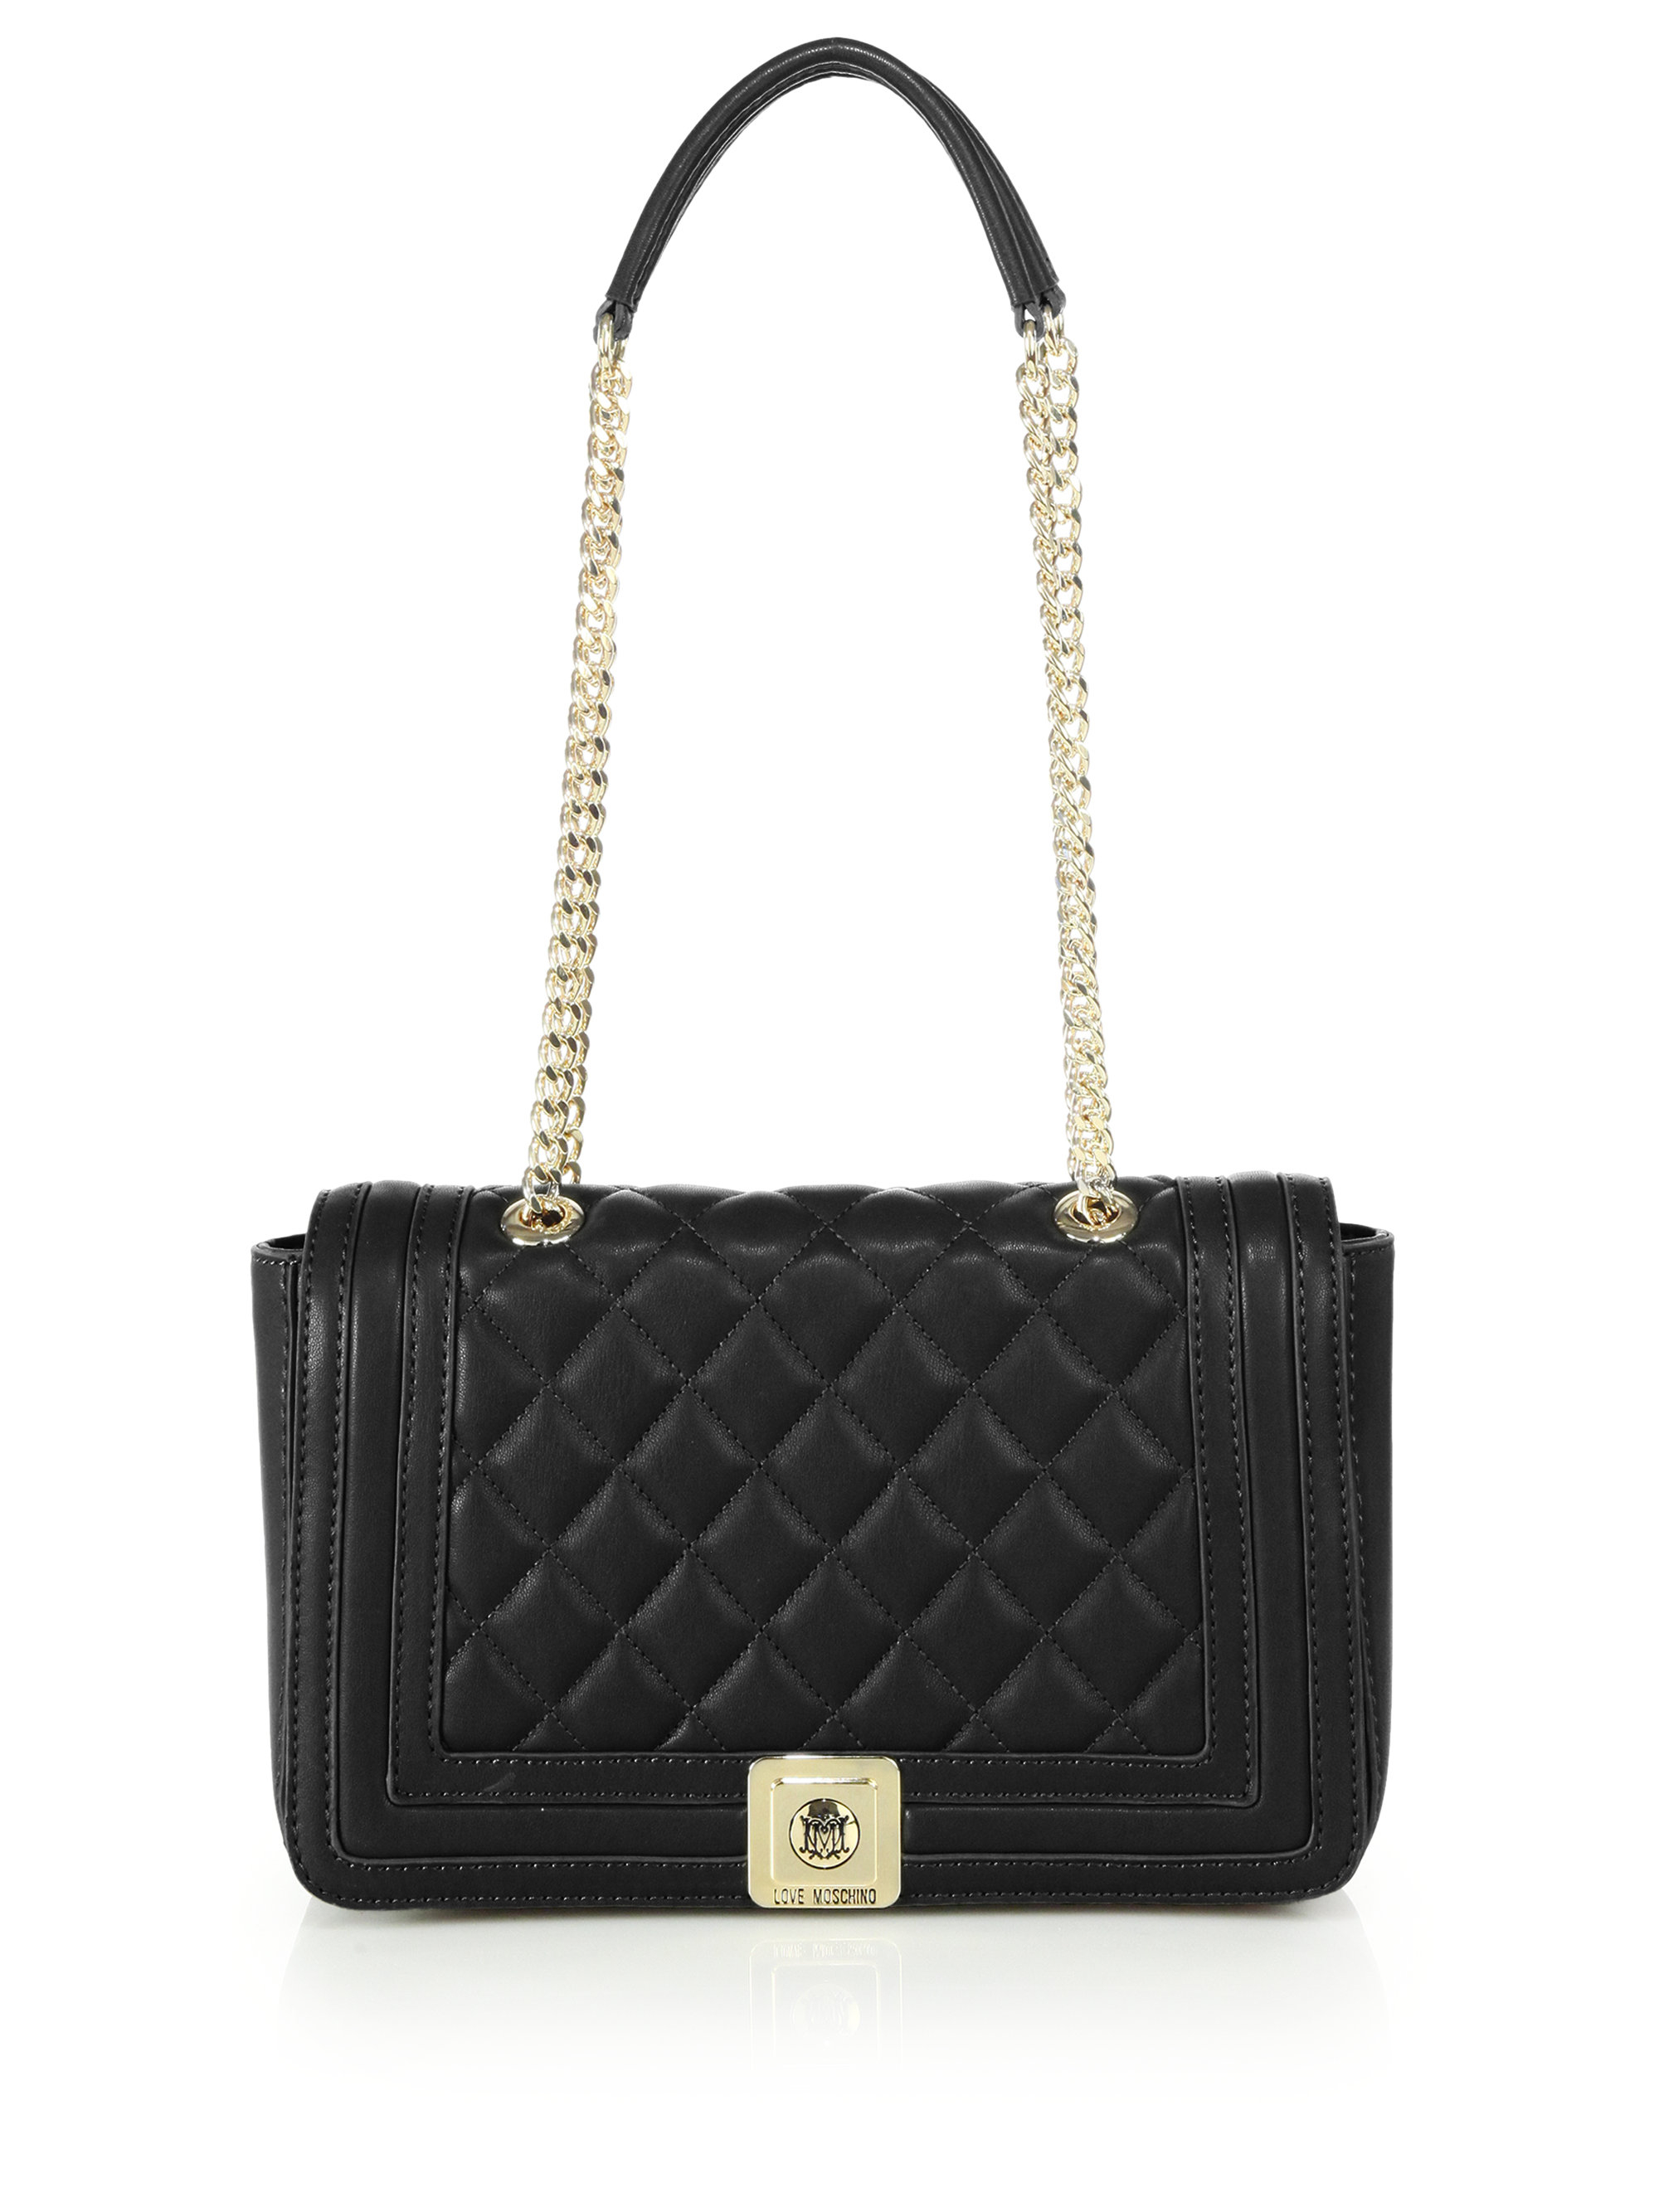 Lyst - Love Moschino Quilted Faux Leather Shoulder Bag in Black